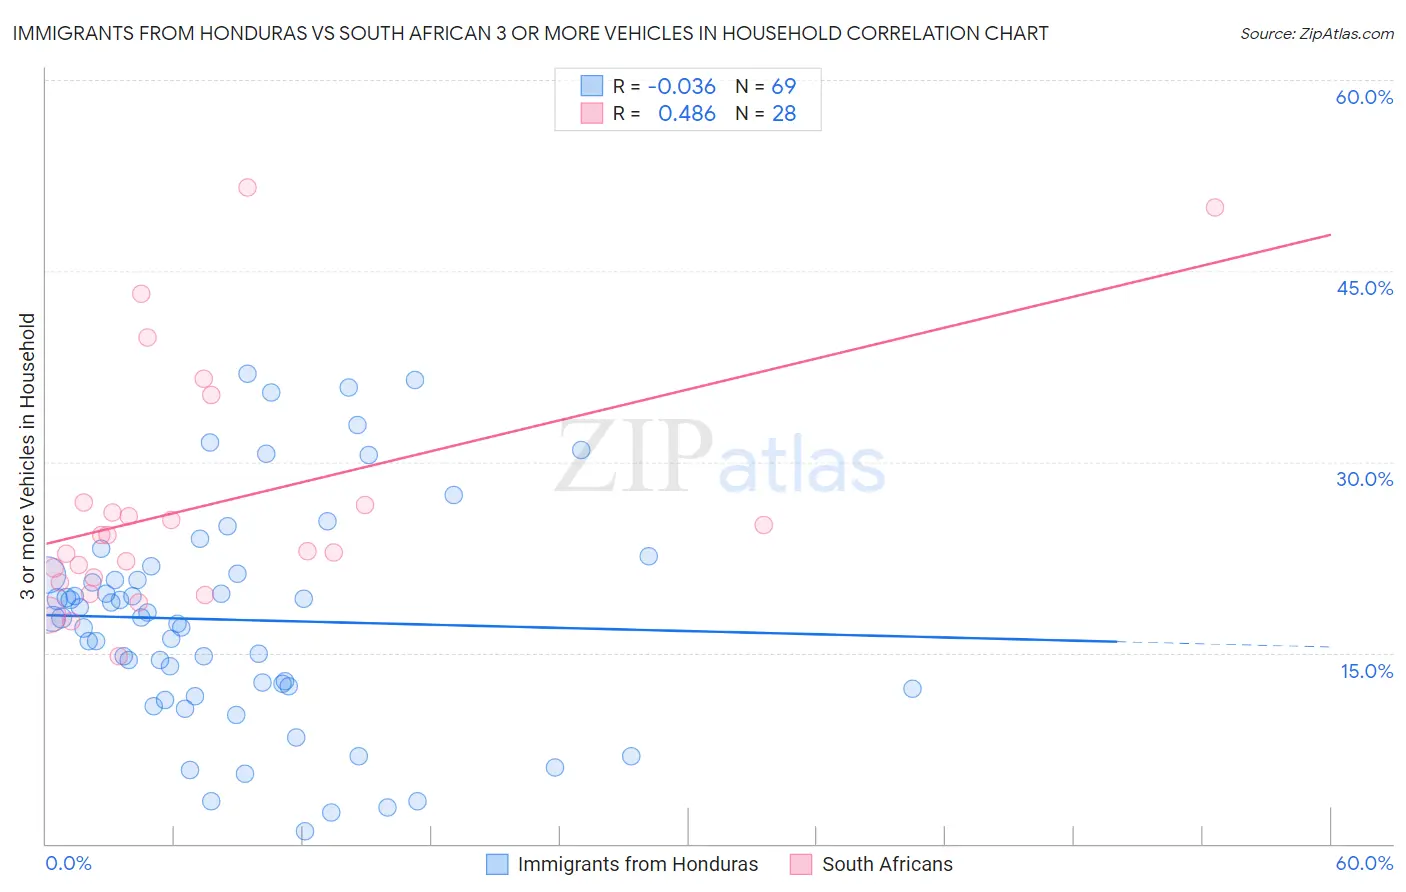 Immigrants from Honduras vs South African 3 or more Vehicles in Household